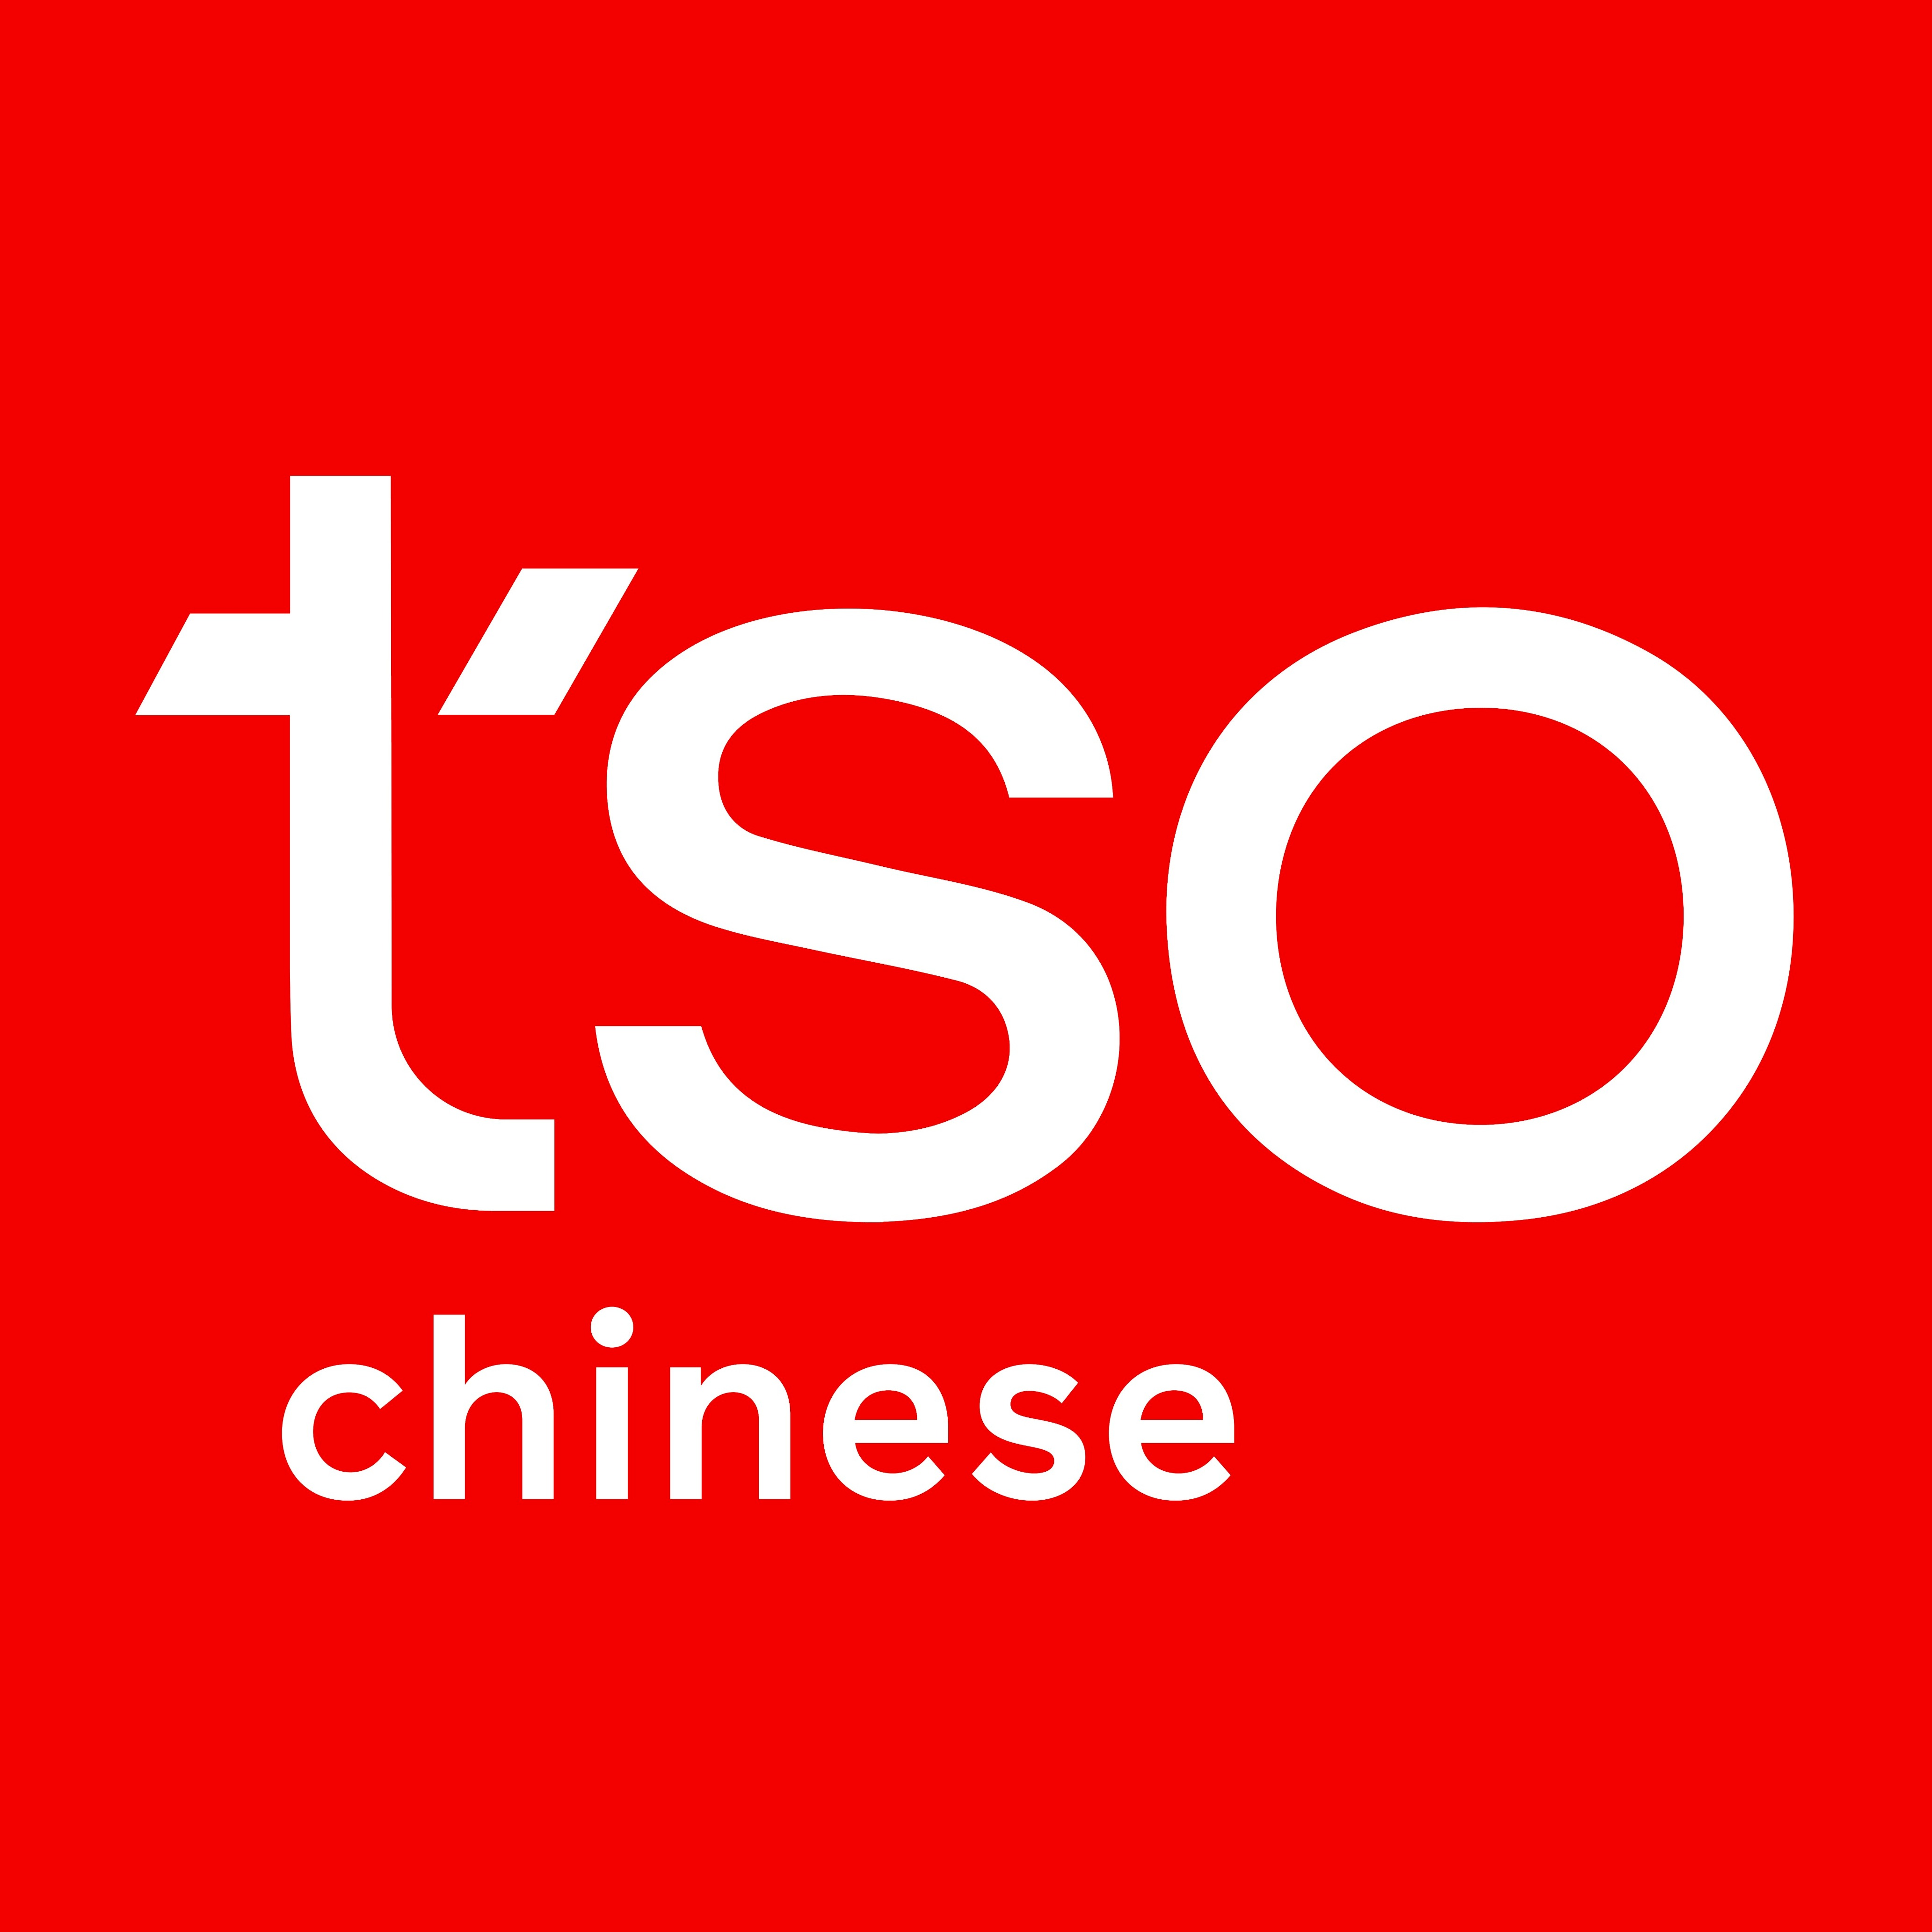 Tso Chinese Delivery Logo